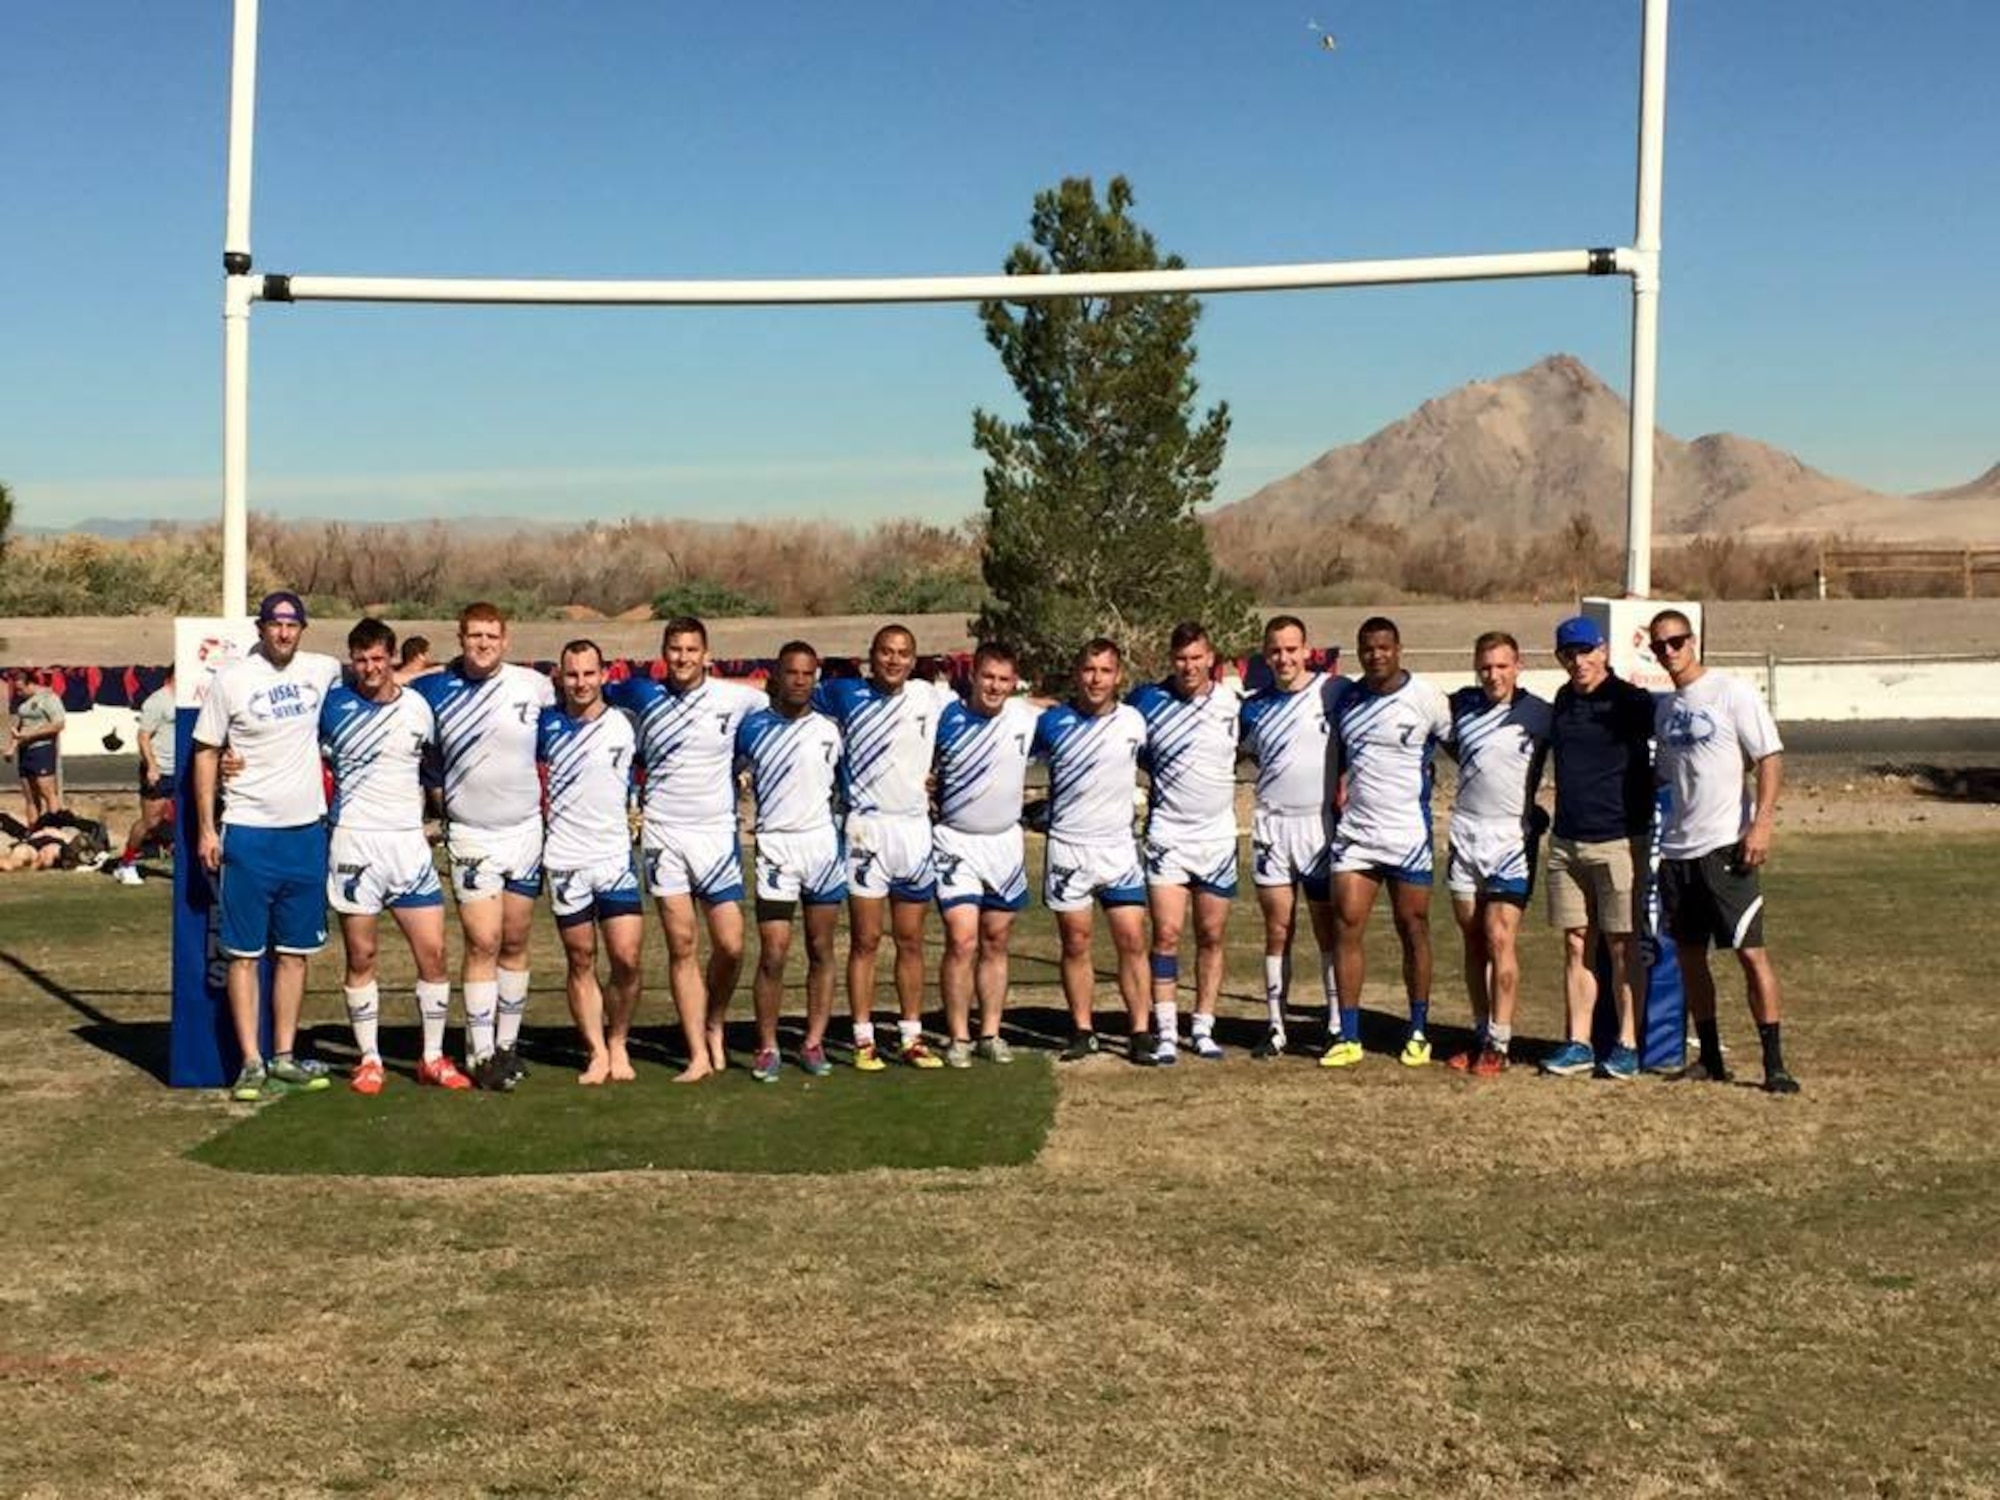 Lt. Col. Timothy Taylor (far left), an Individual Mobilization Augmentee assigned to Pacific Command, with the Air Force Ace's Division Rugby 7s team at the Las Vegas Invitational Tournament. 